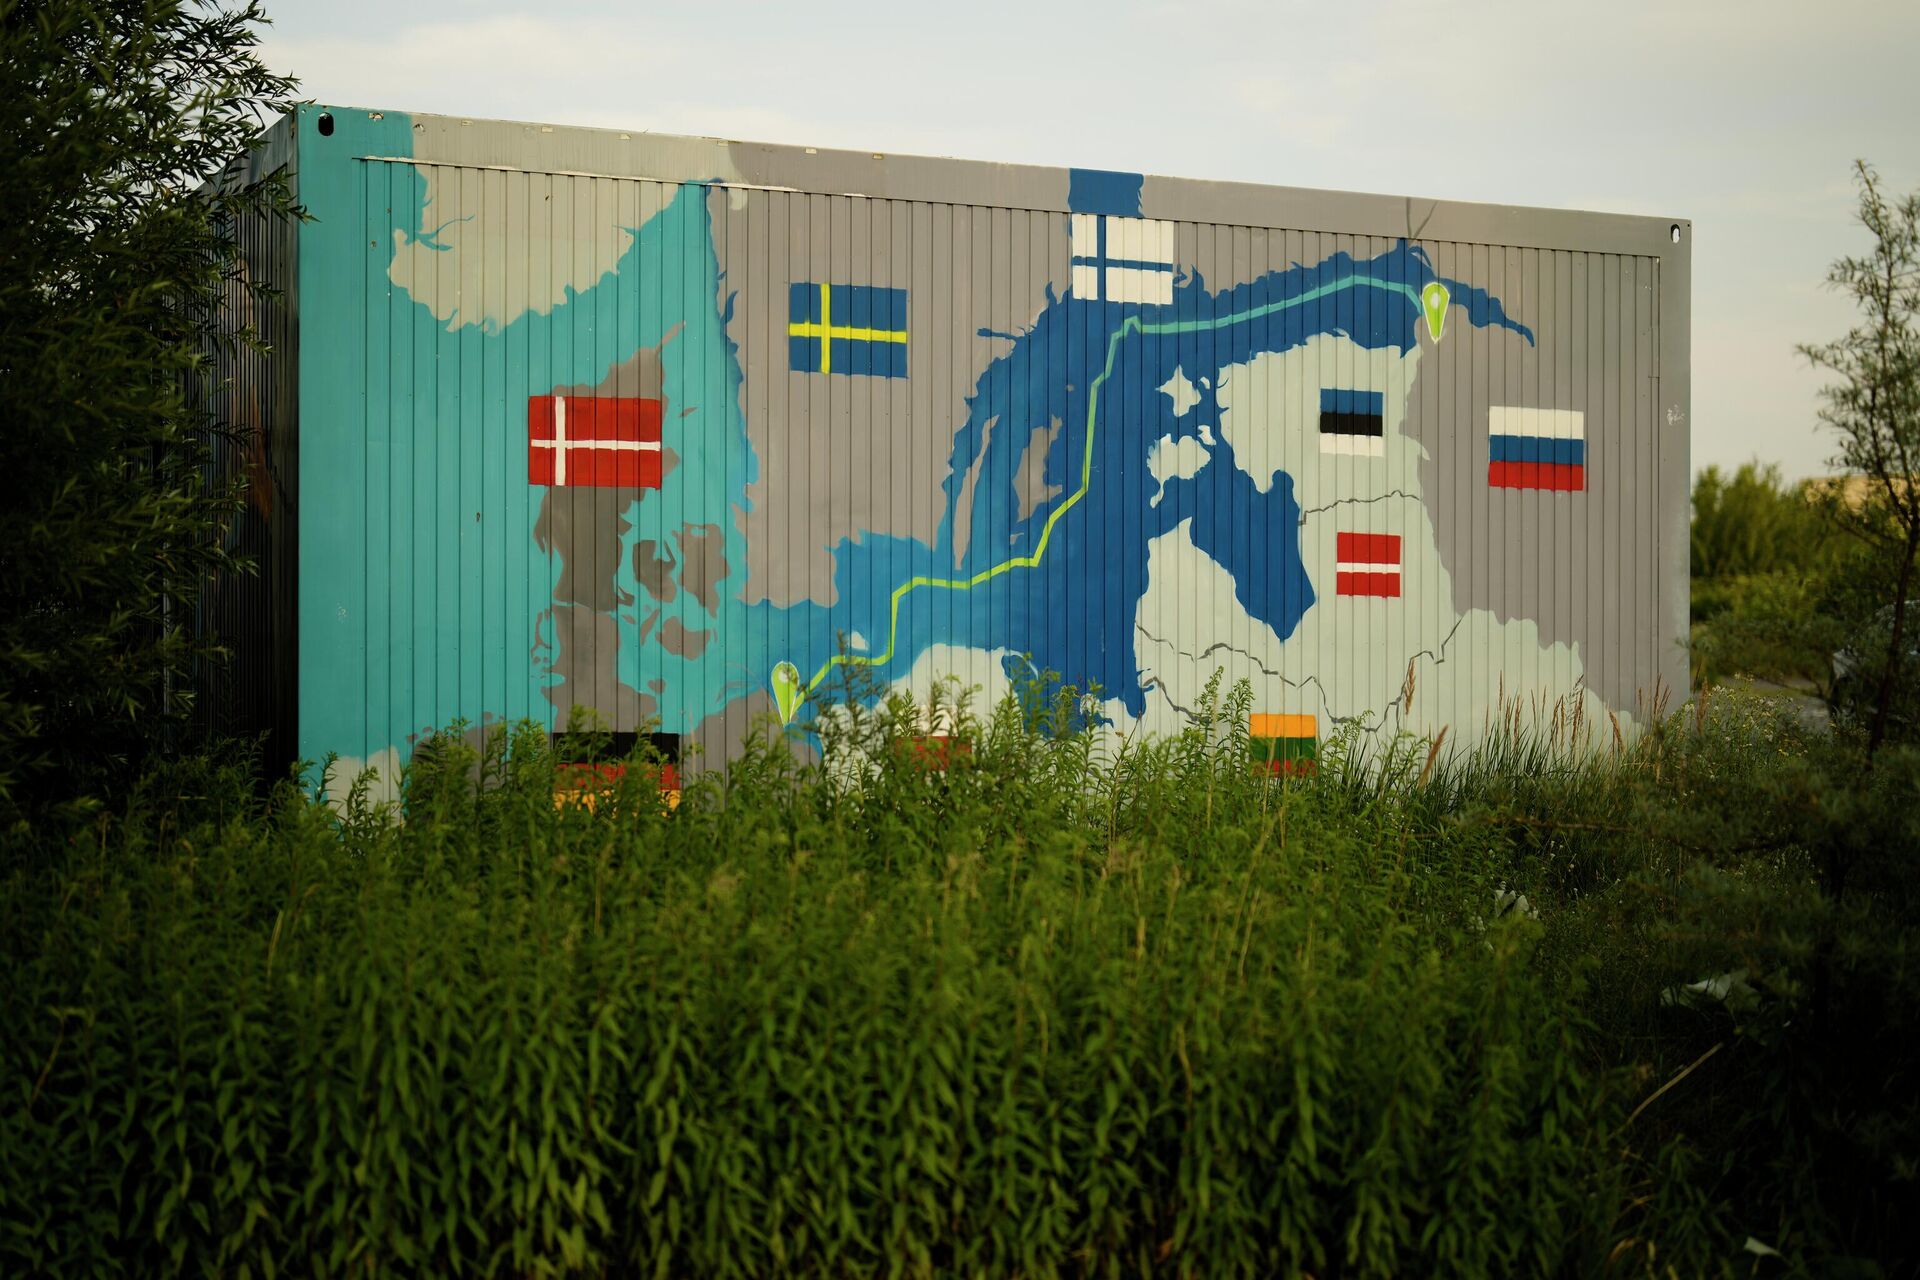 A painting showing the Nord Stream pipelines is displayed on a container near the Nord Stream 1 Baltic Sea pipeline in Lubmin, Germany, Wednesday, July 20, 2022 - Sputnik International, 1920, 14.10.2022